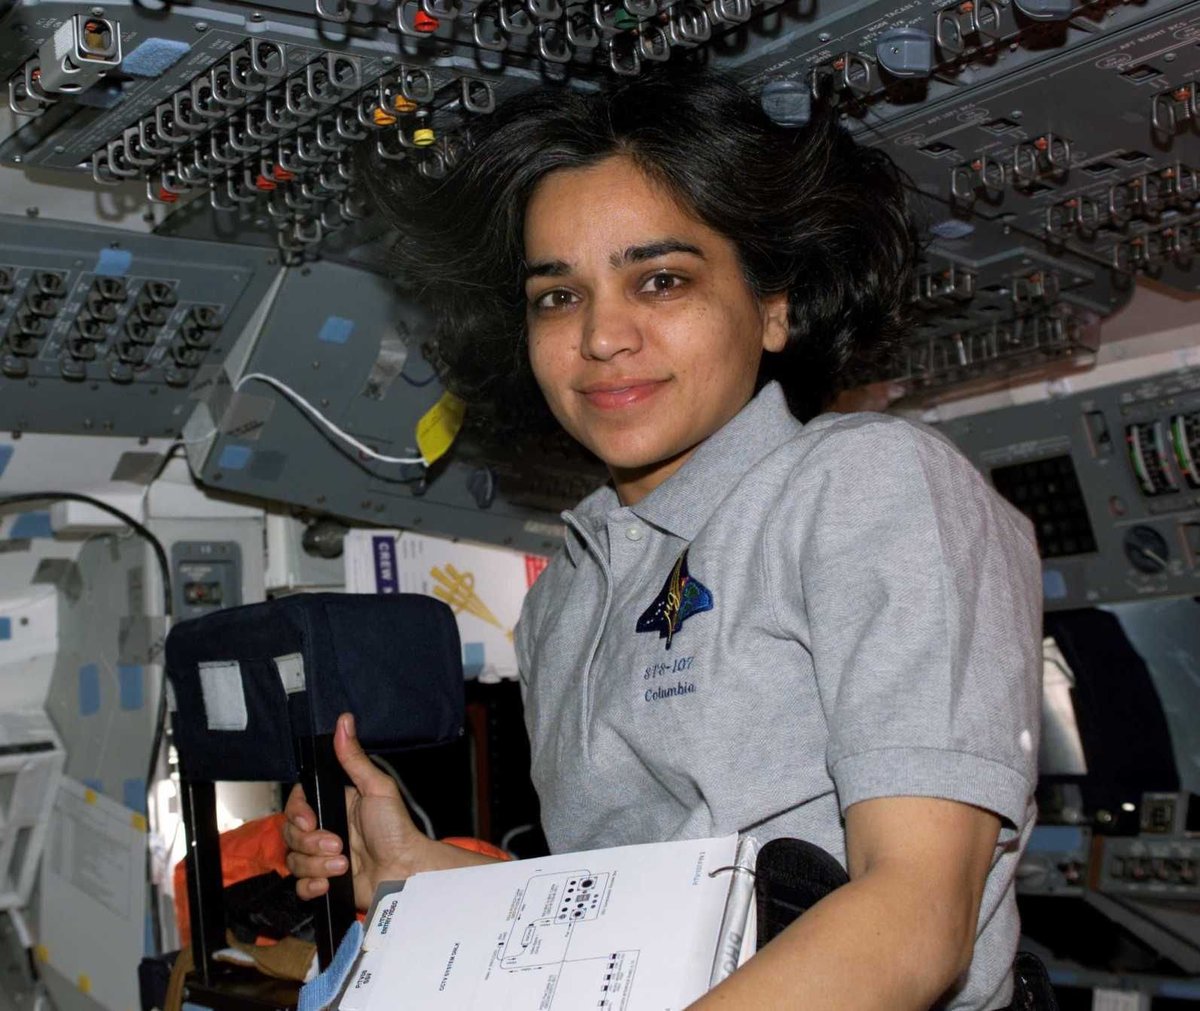 Kalpana Chawla was Mission Specialist for STS-107. She was born in India and moved to the United States in 1982. In 1988 she began working for the NASA Ames Research Center, and later joined the Astronaut Corps in 1995 after becoming a US citizen. She flew on STS-87 in 1997.